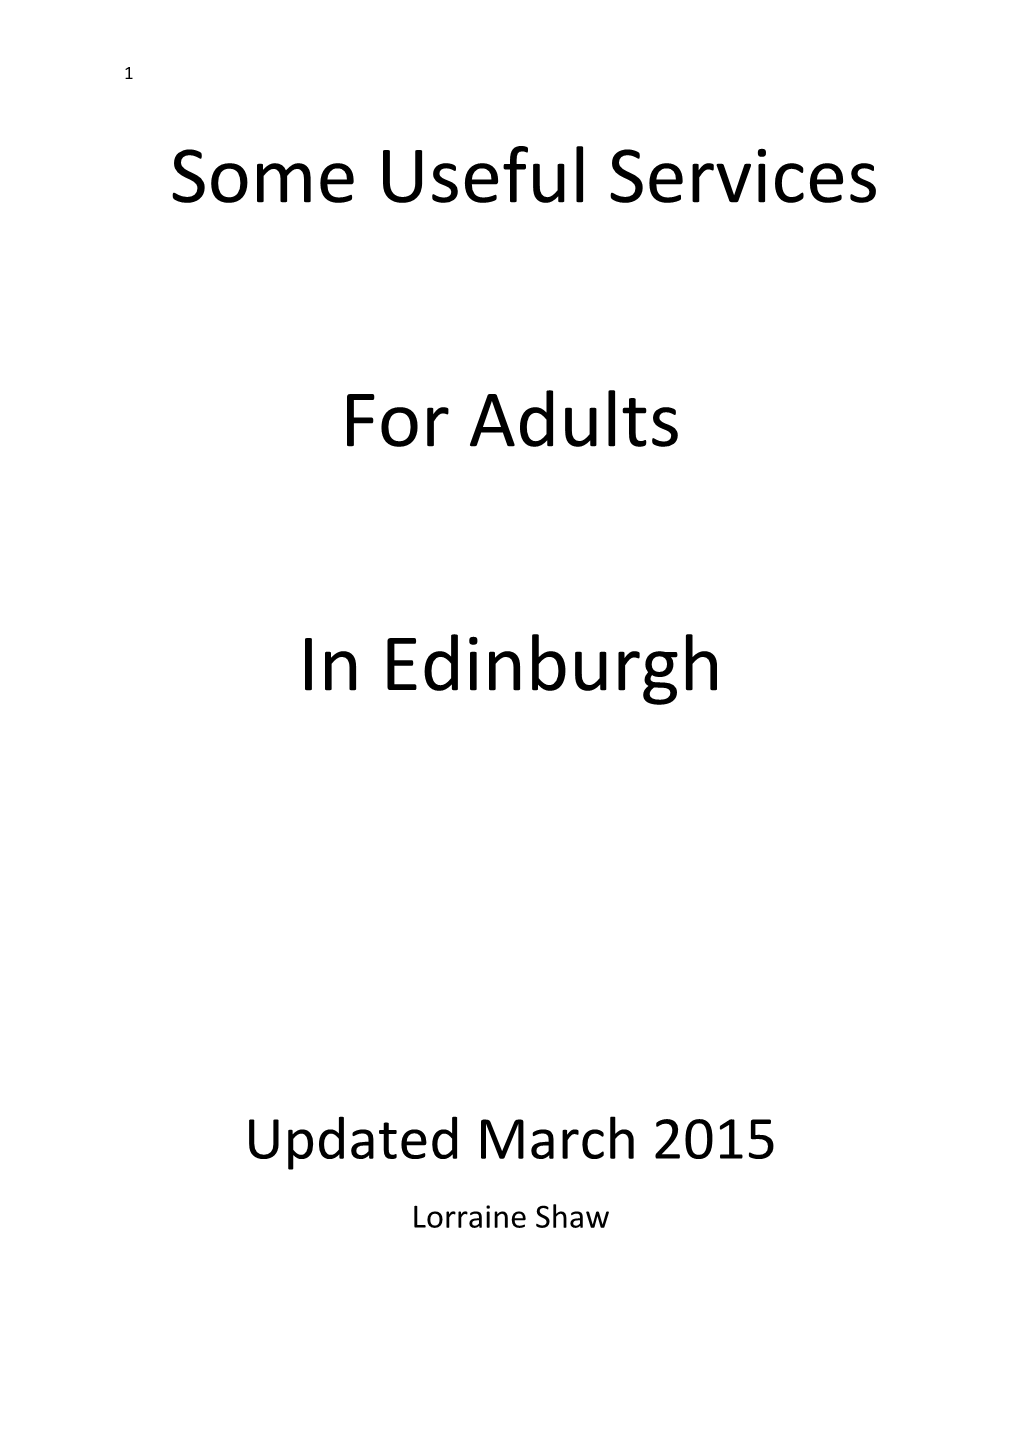 Some Useful Services for Adults in Edinburgh